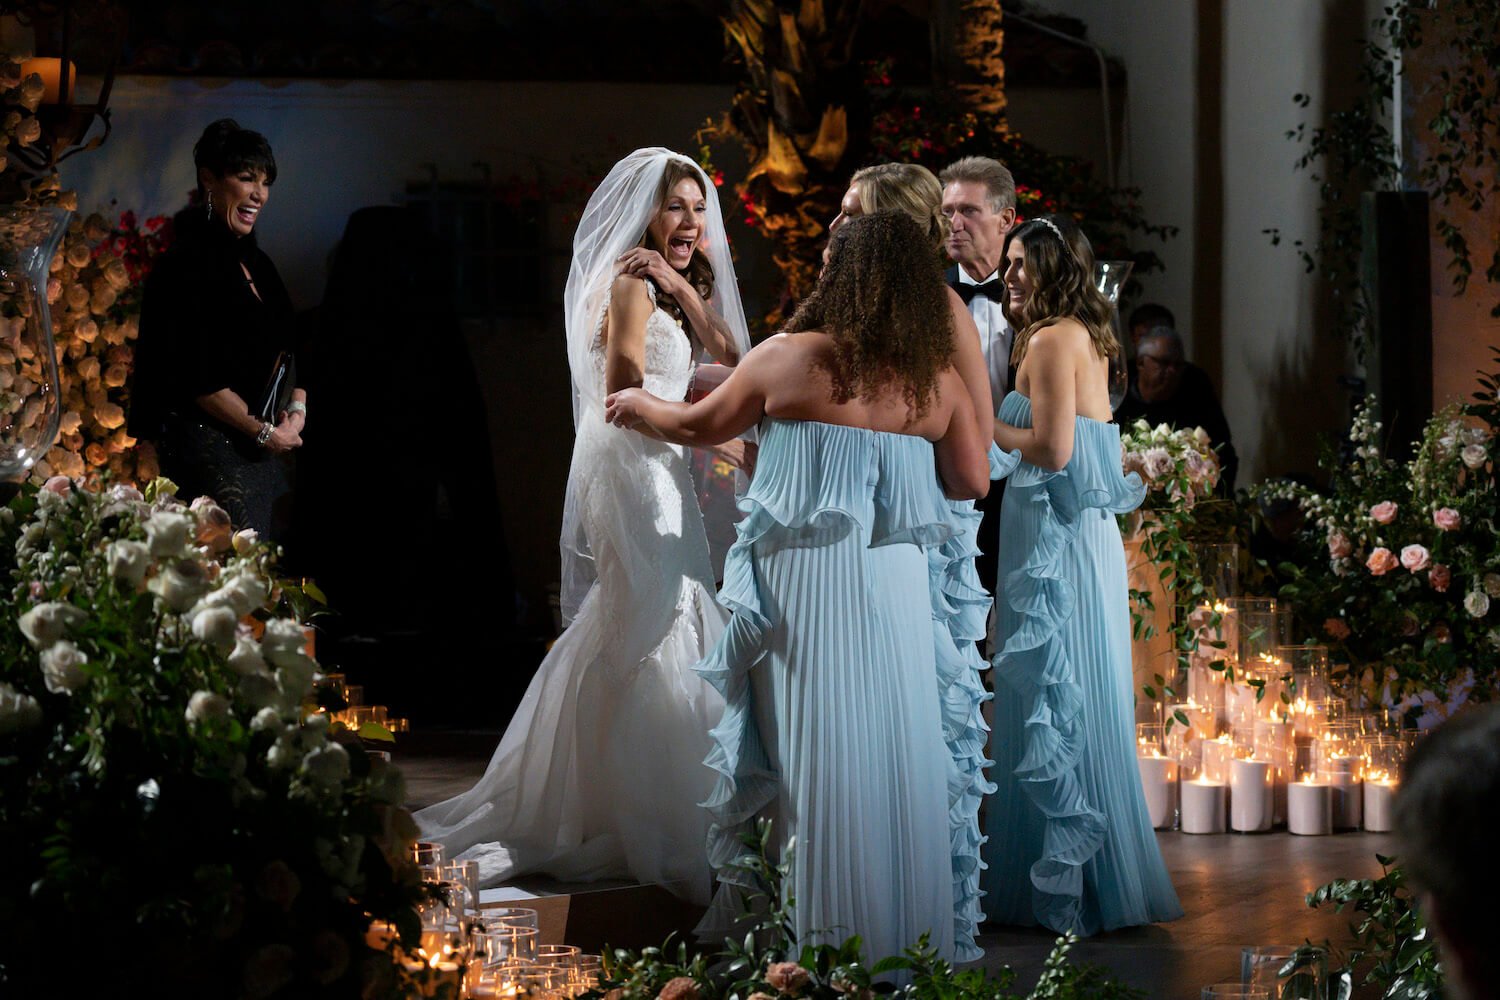 'The Golden Bachelor' wedding showing Theresa Nist in a wedding dress surrounded by bridesmaids dressed in light blue